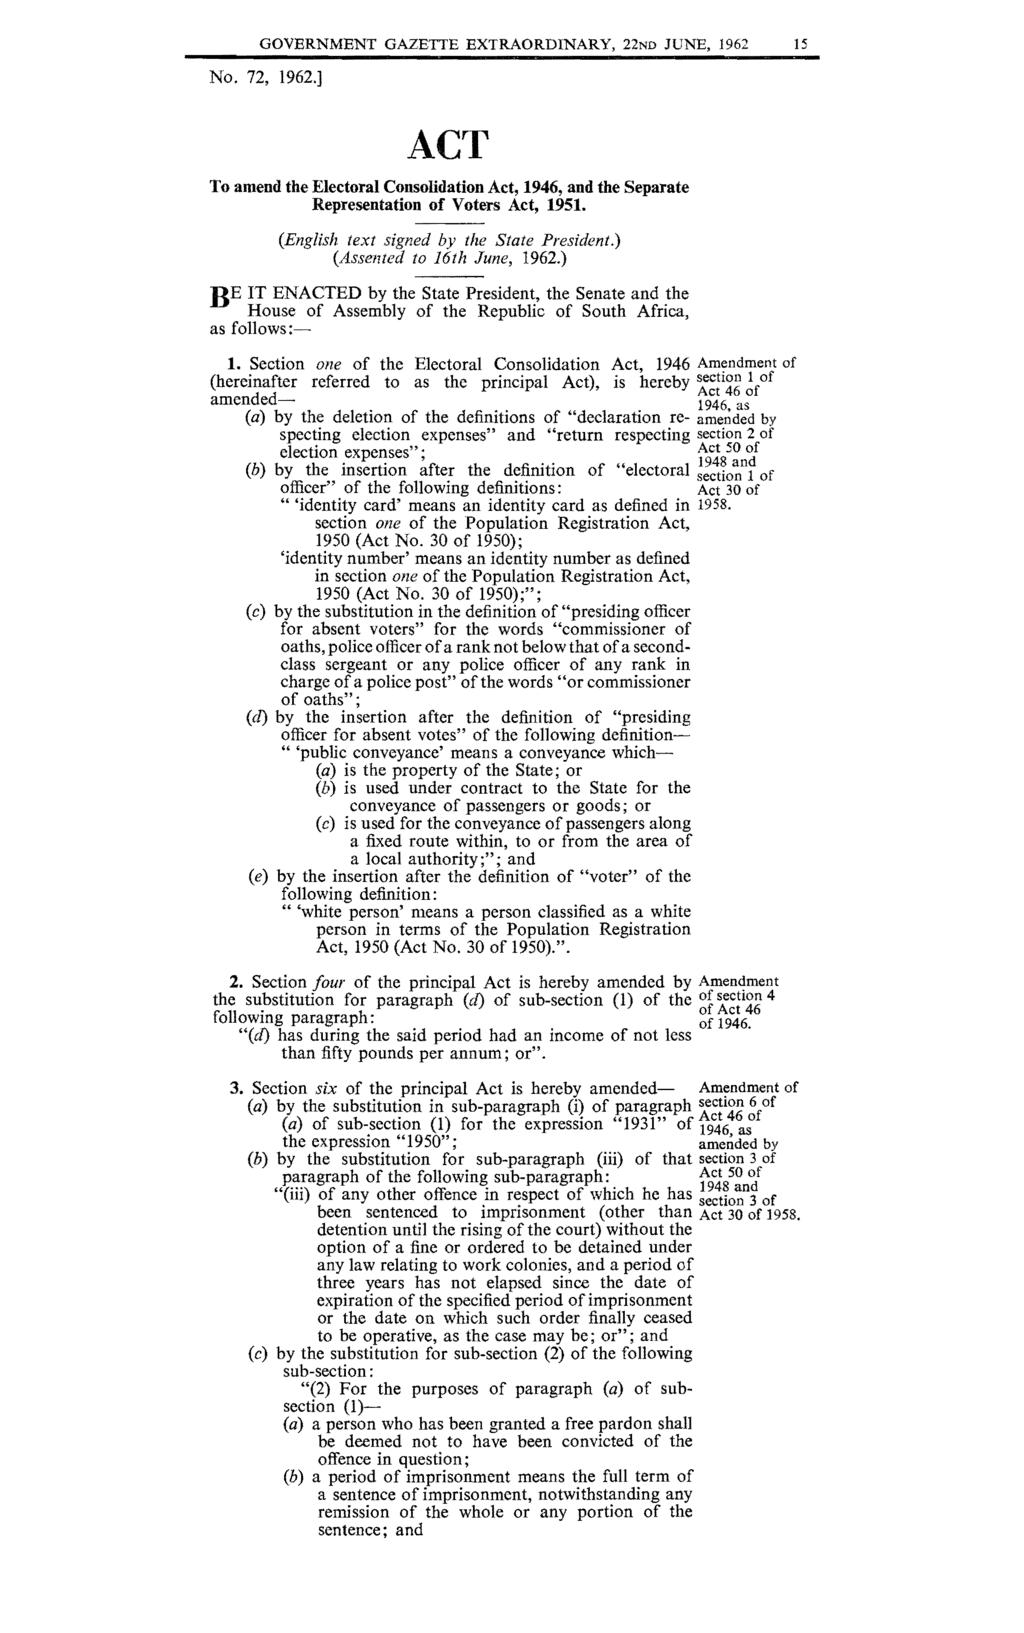 GOVERNMENT GAZETTE EXTRAORDINARY, 22ND JUNE, 1962 15 No. 72, 1962.] ACT To amend the Electoral Consolidation Act, 1946, and the Separate Representation of Voters Act, 1951.